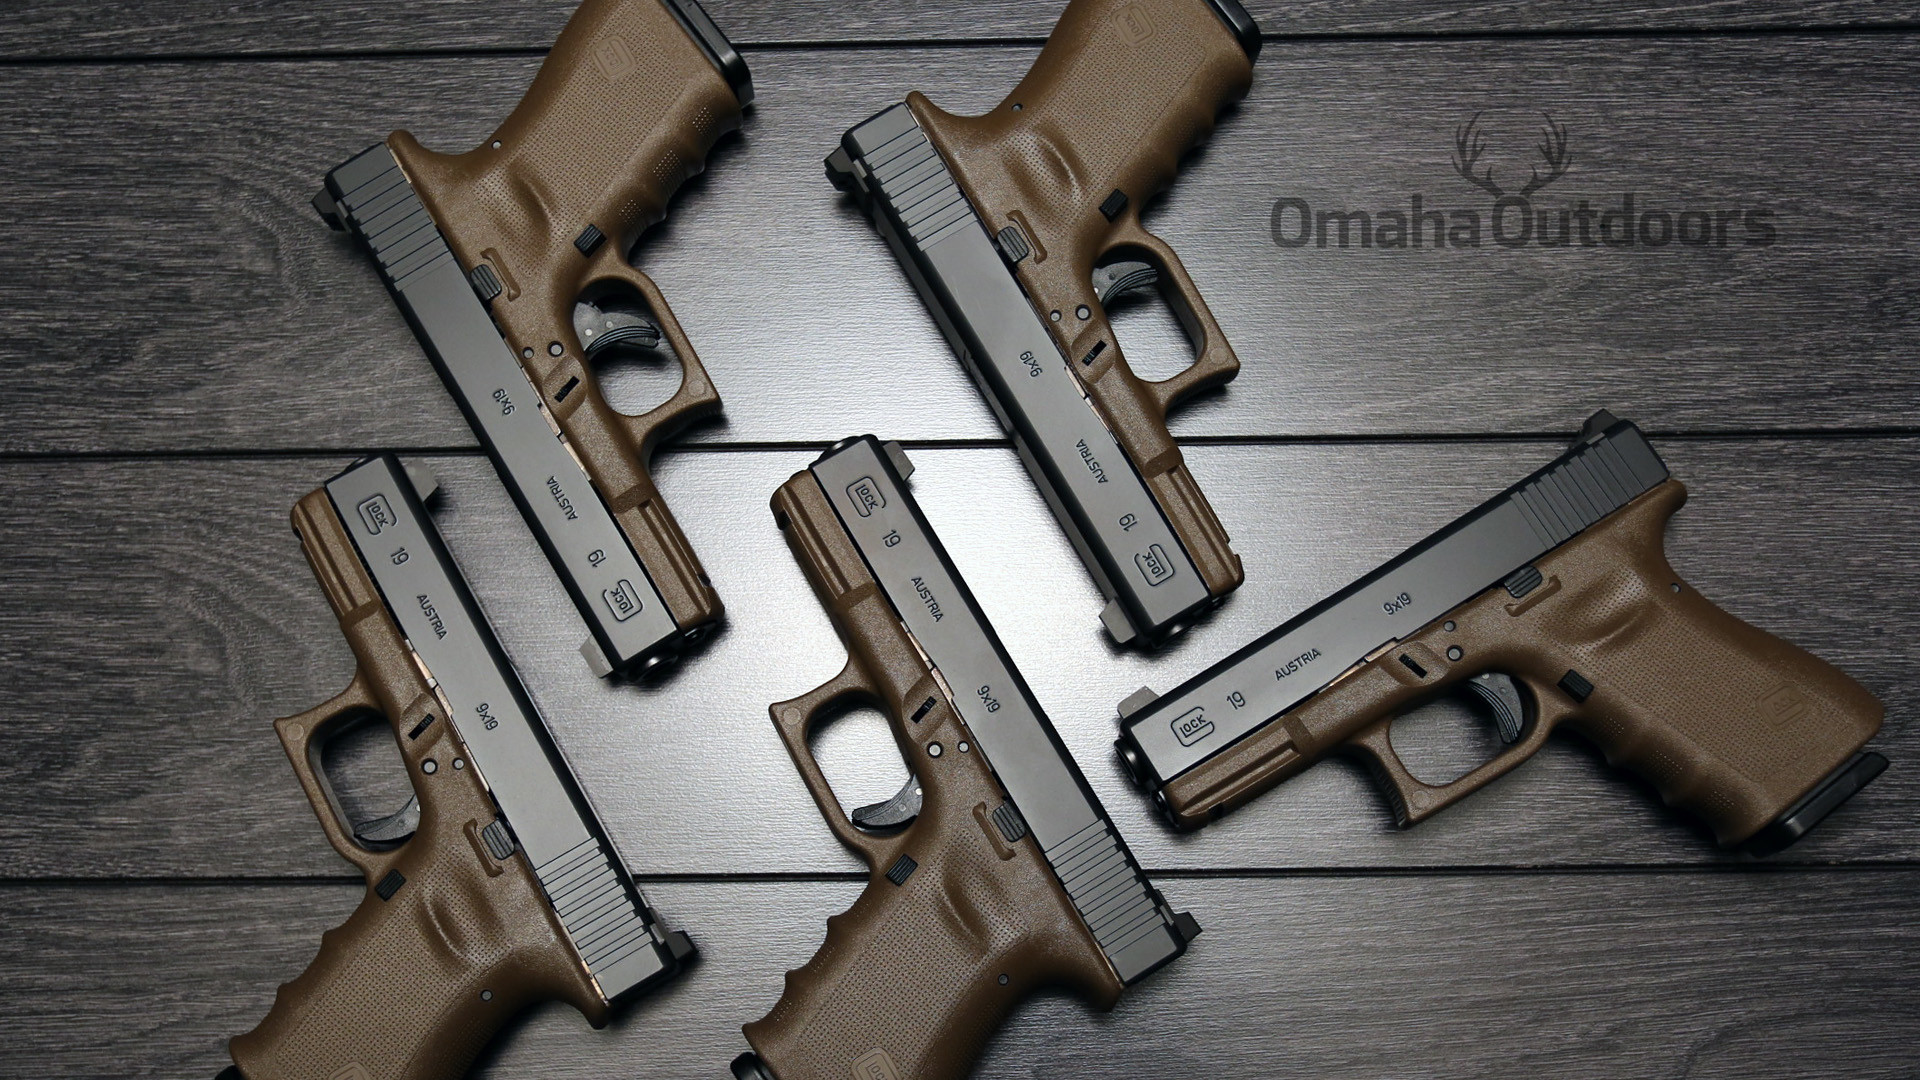 1920x1080 ... Glock Wallpapers for Free, Photos  Gun Review Limited Vickers  Tactical Glocks 17 19 RTF2 FDE